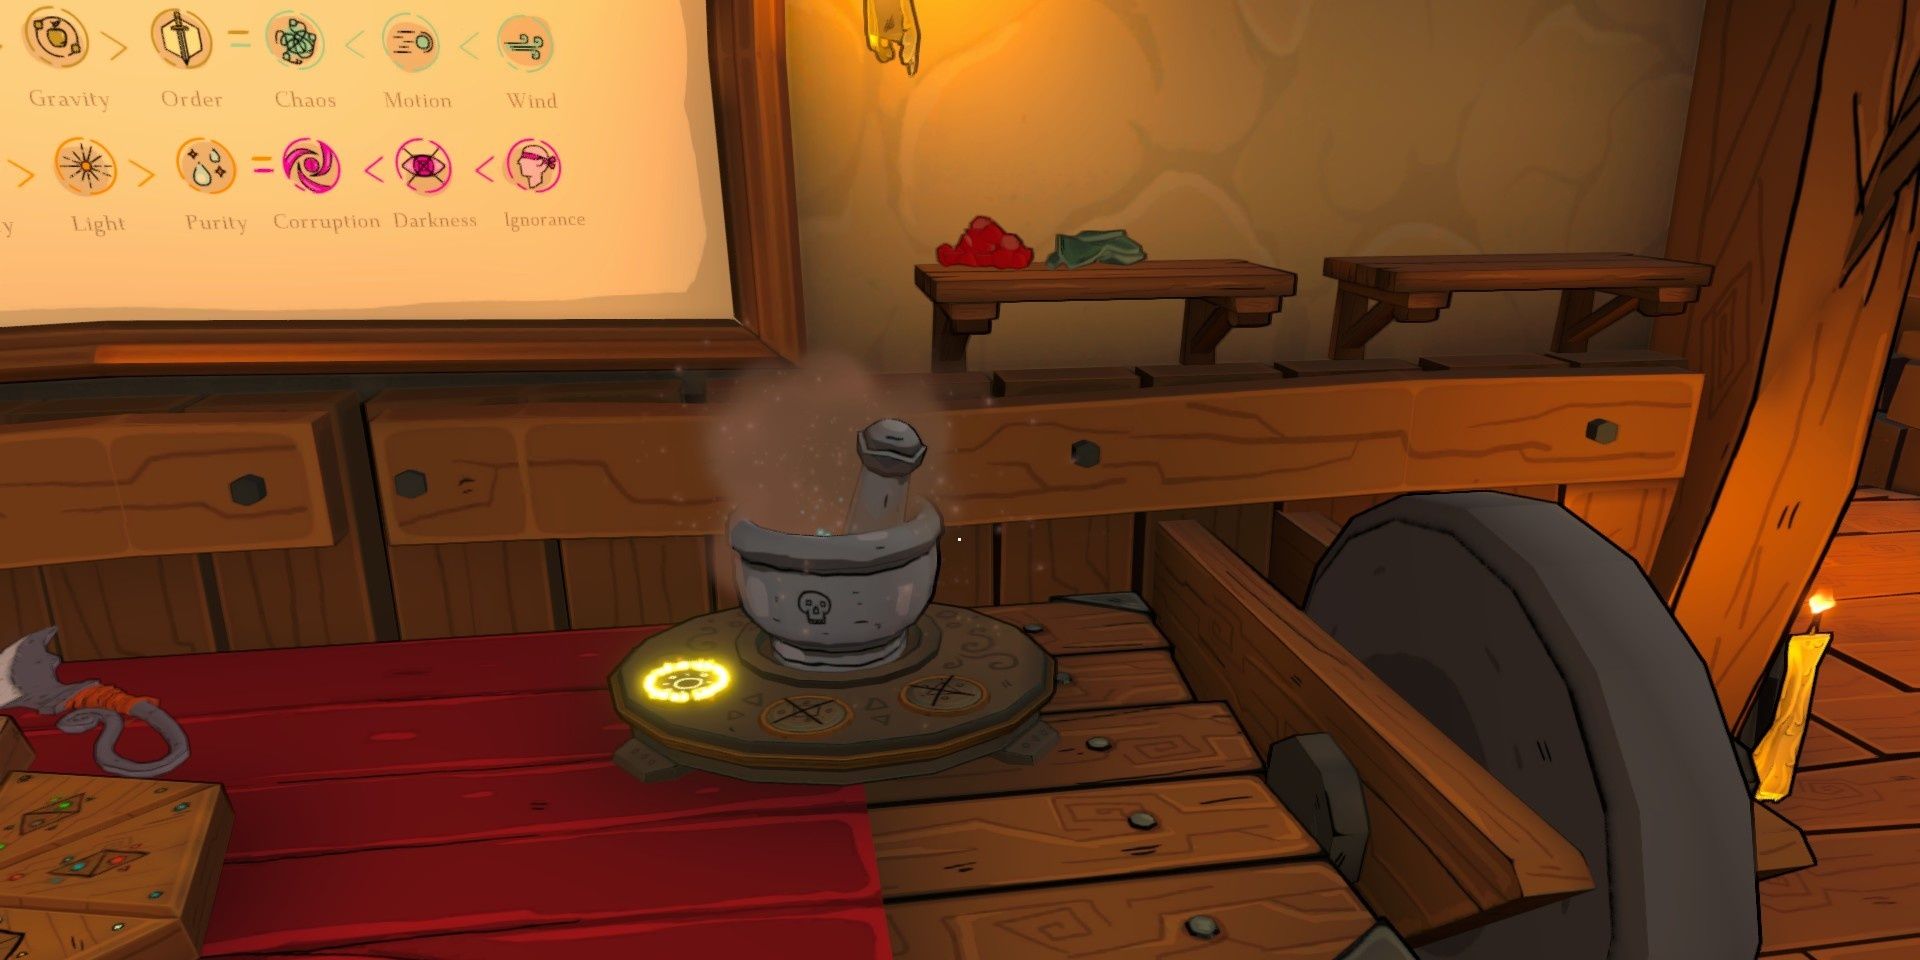 Using the mortar and pestle to grind ingredients in Alchemist Simulator